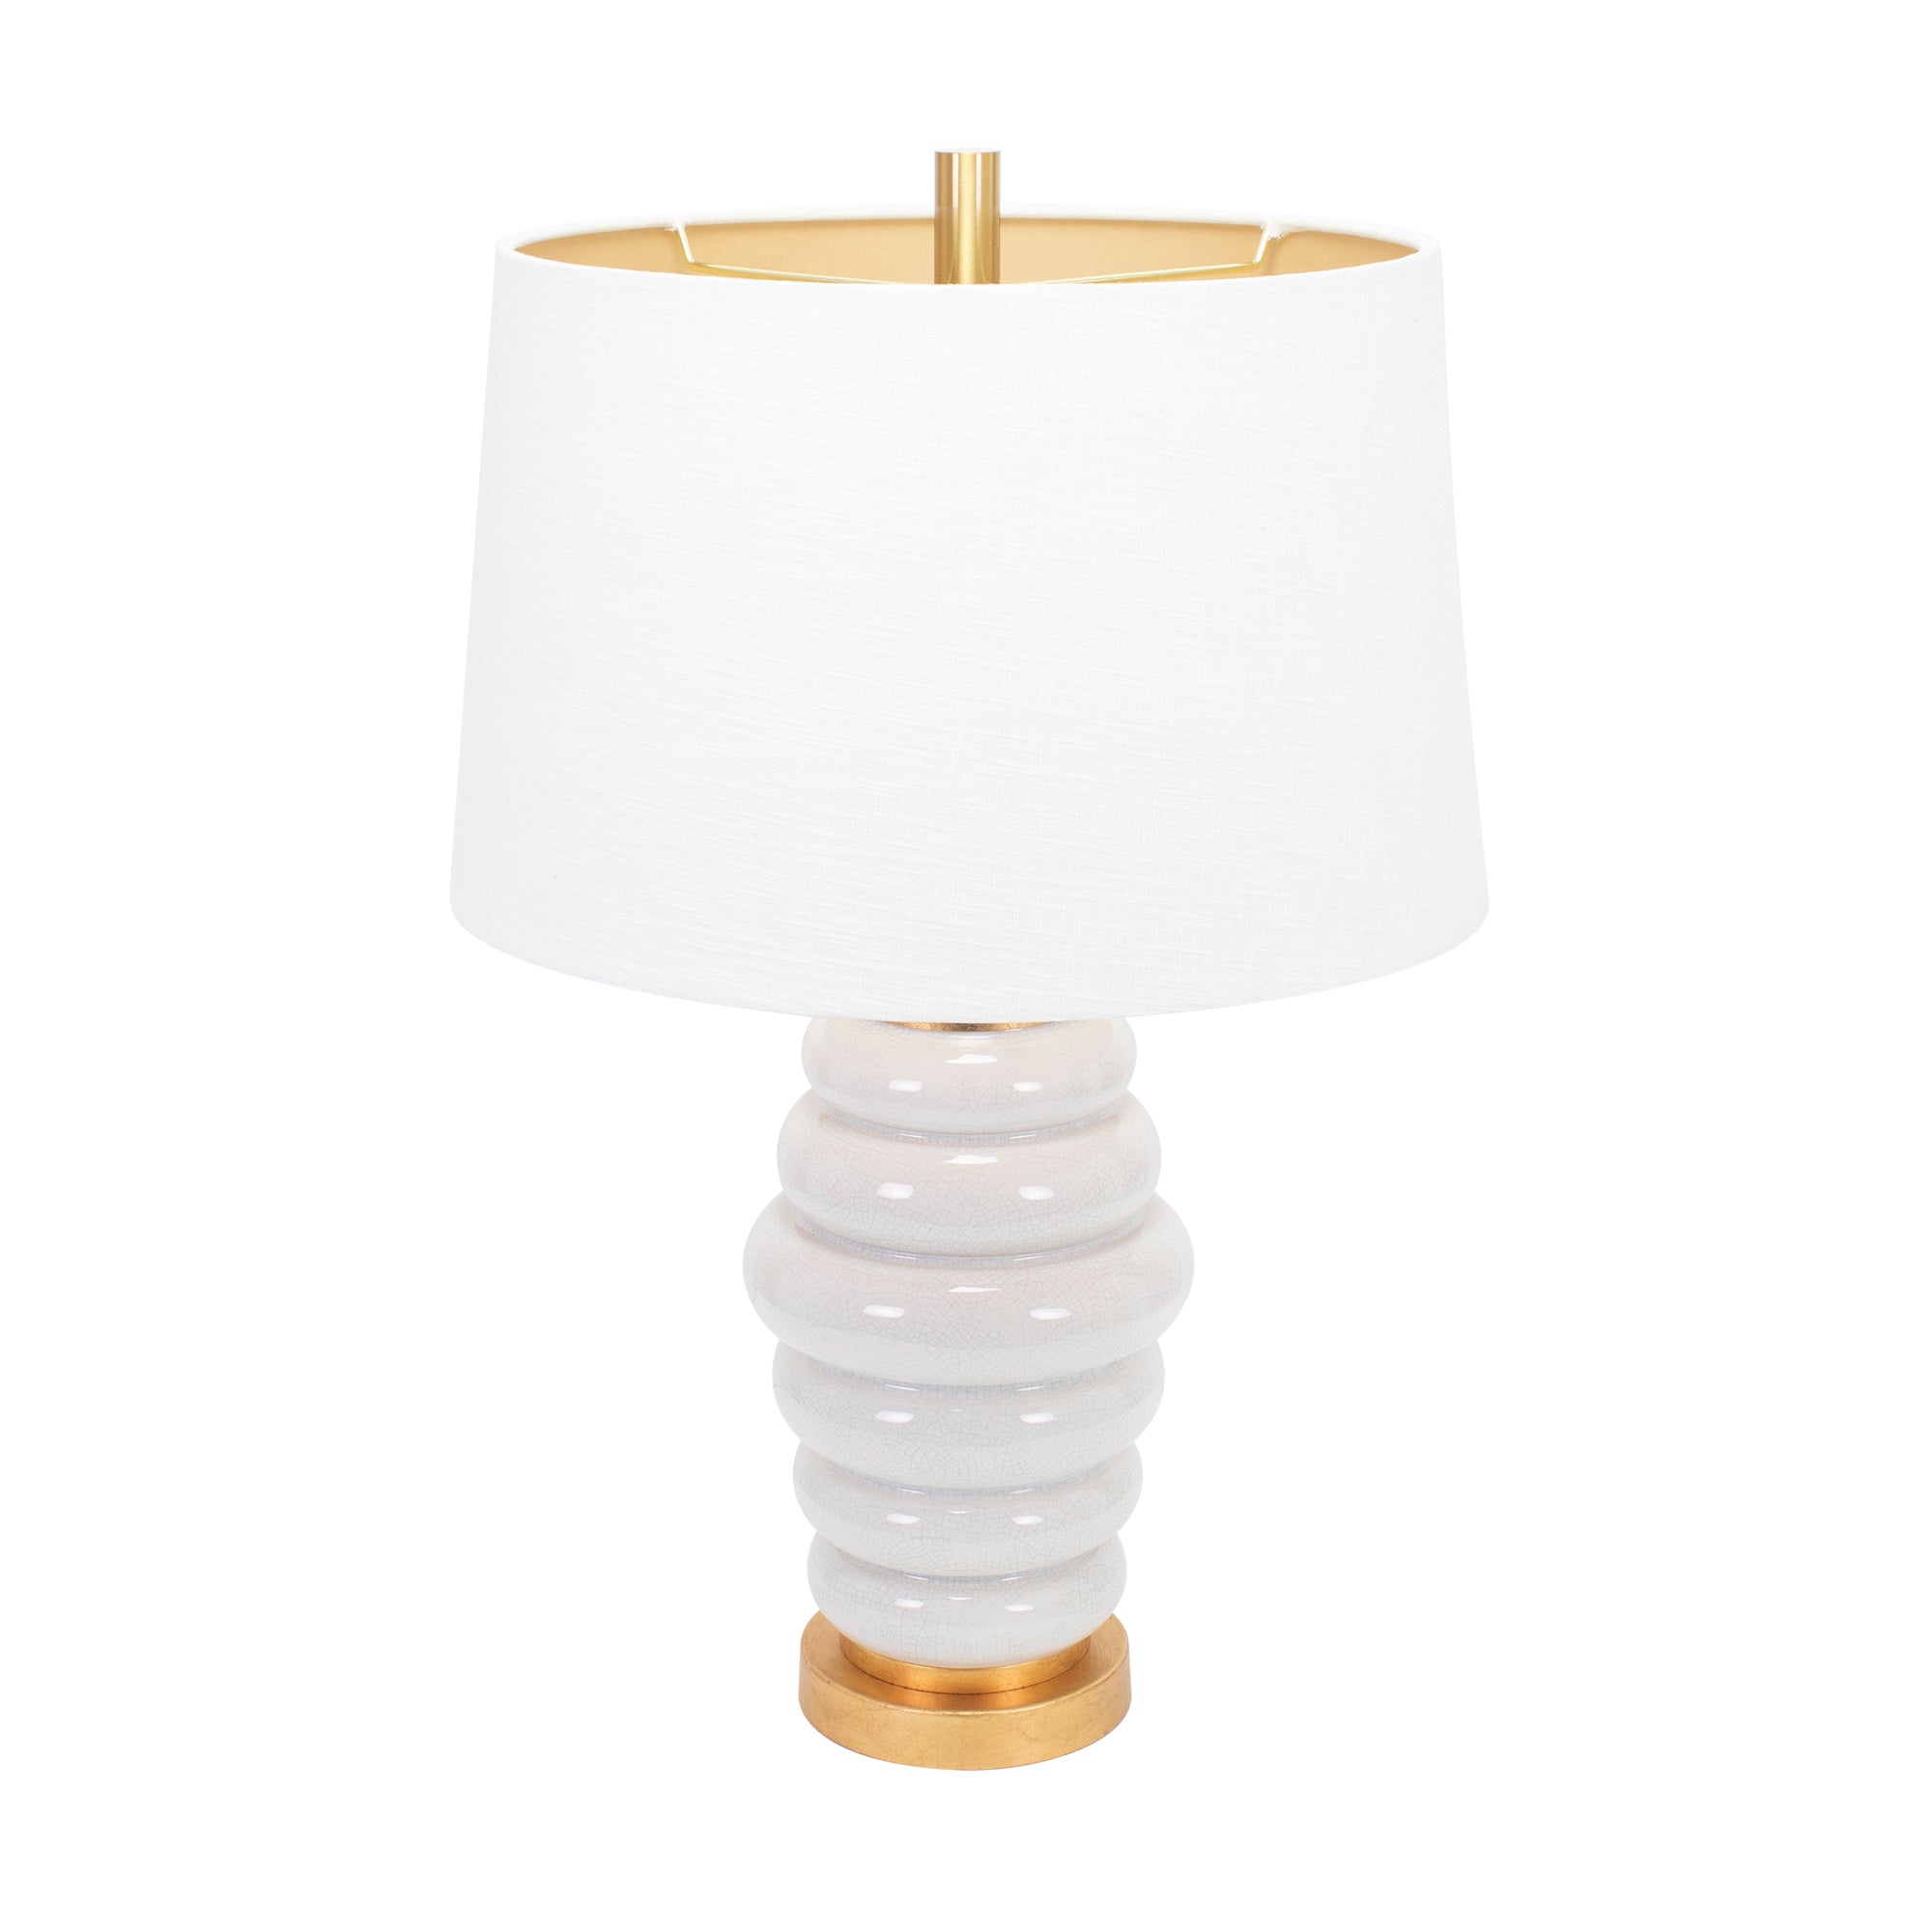 Beekman Table Lamp - Couture Lamps